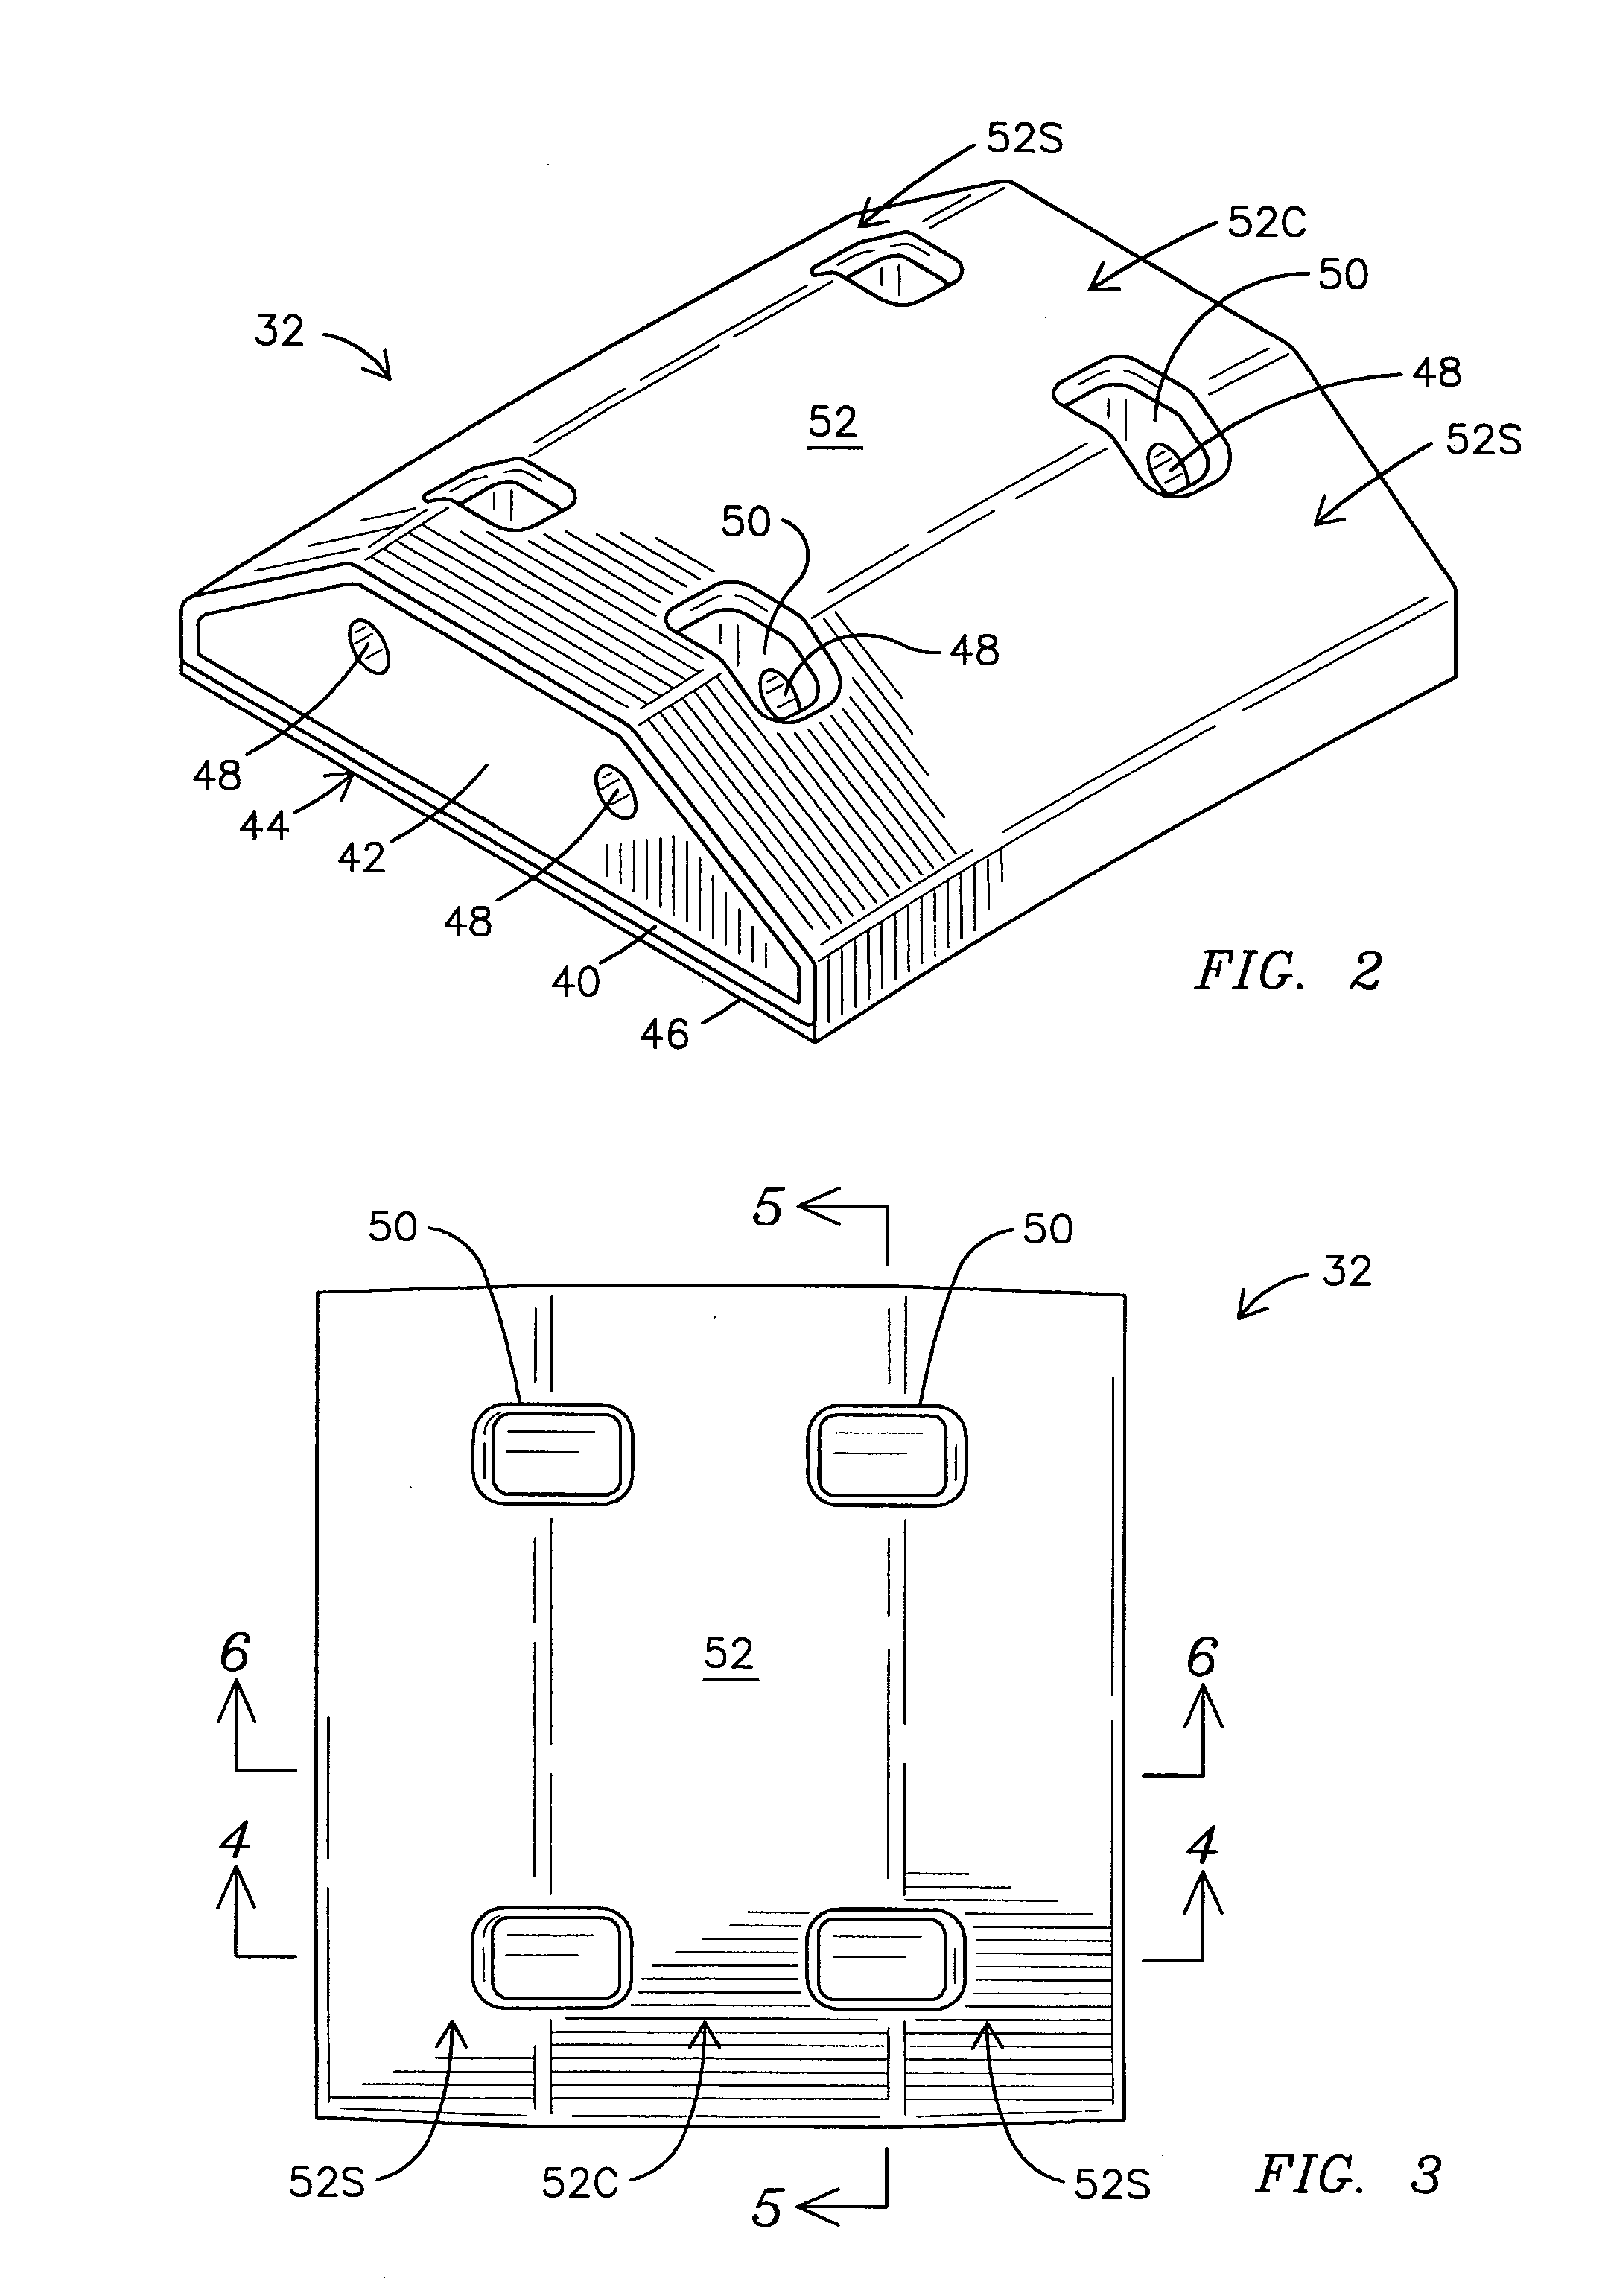 Pin-loaded mounting apparatus for a refractory component in a combustion turbine engine